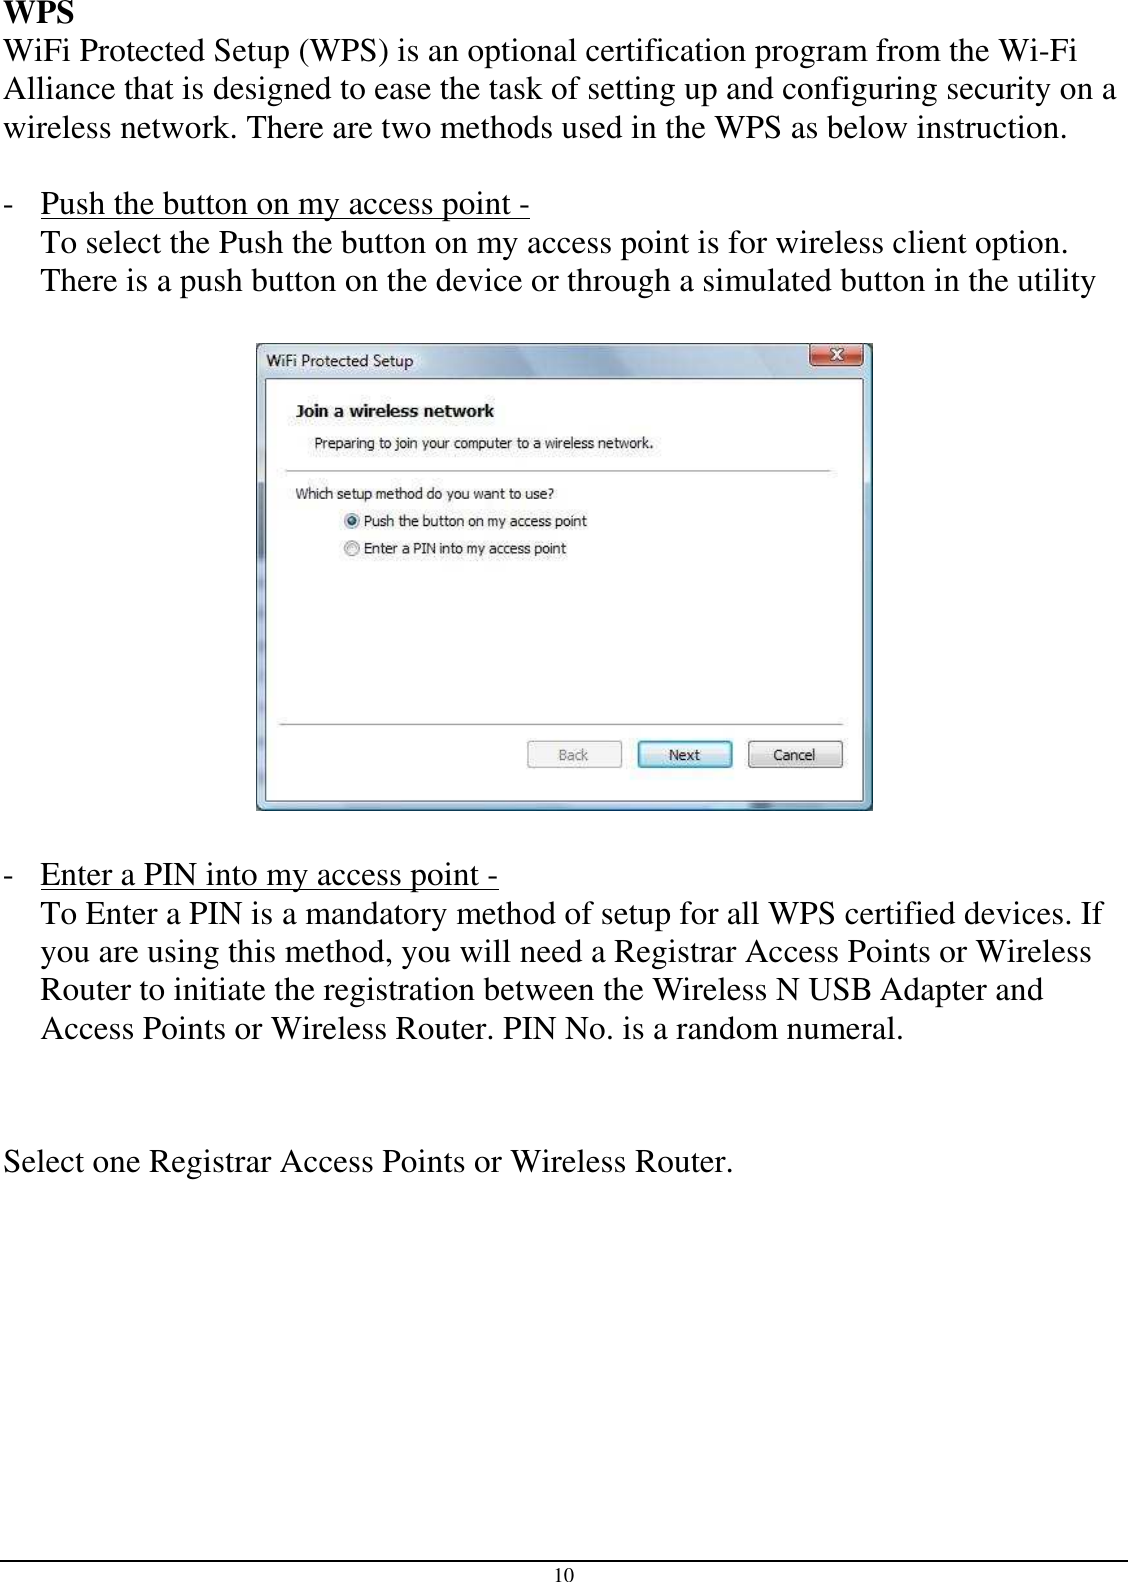 10 WPS WiFi Protected Setup (WPS) is an optional certification program from the Wi-Fi Alliance that is designed to ease the task of setting up and configuring security on a wireless network. There are two methods used in the WPS as below instruction.  - Push the button on my access point -  To select the Push the button on my access point is for wireless client option. There is a push button on the device or through a simulated button in the utility     - Enter a PIN into my access point - To Enter a PIN is a mandatory method of setup for all WPS certified devices. If you are using this method, you will need a Registrar Access Points or Wireless Router to initiate the registration between the Wireless N USB Adapter and Access Points or Wireless Router. PIN No. is a random numeral.   Select one Registrar Access Points or Wireless Router. 